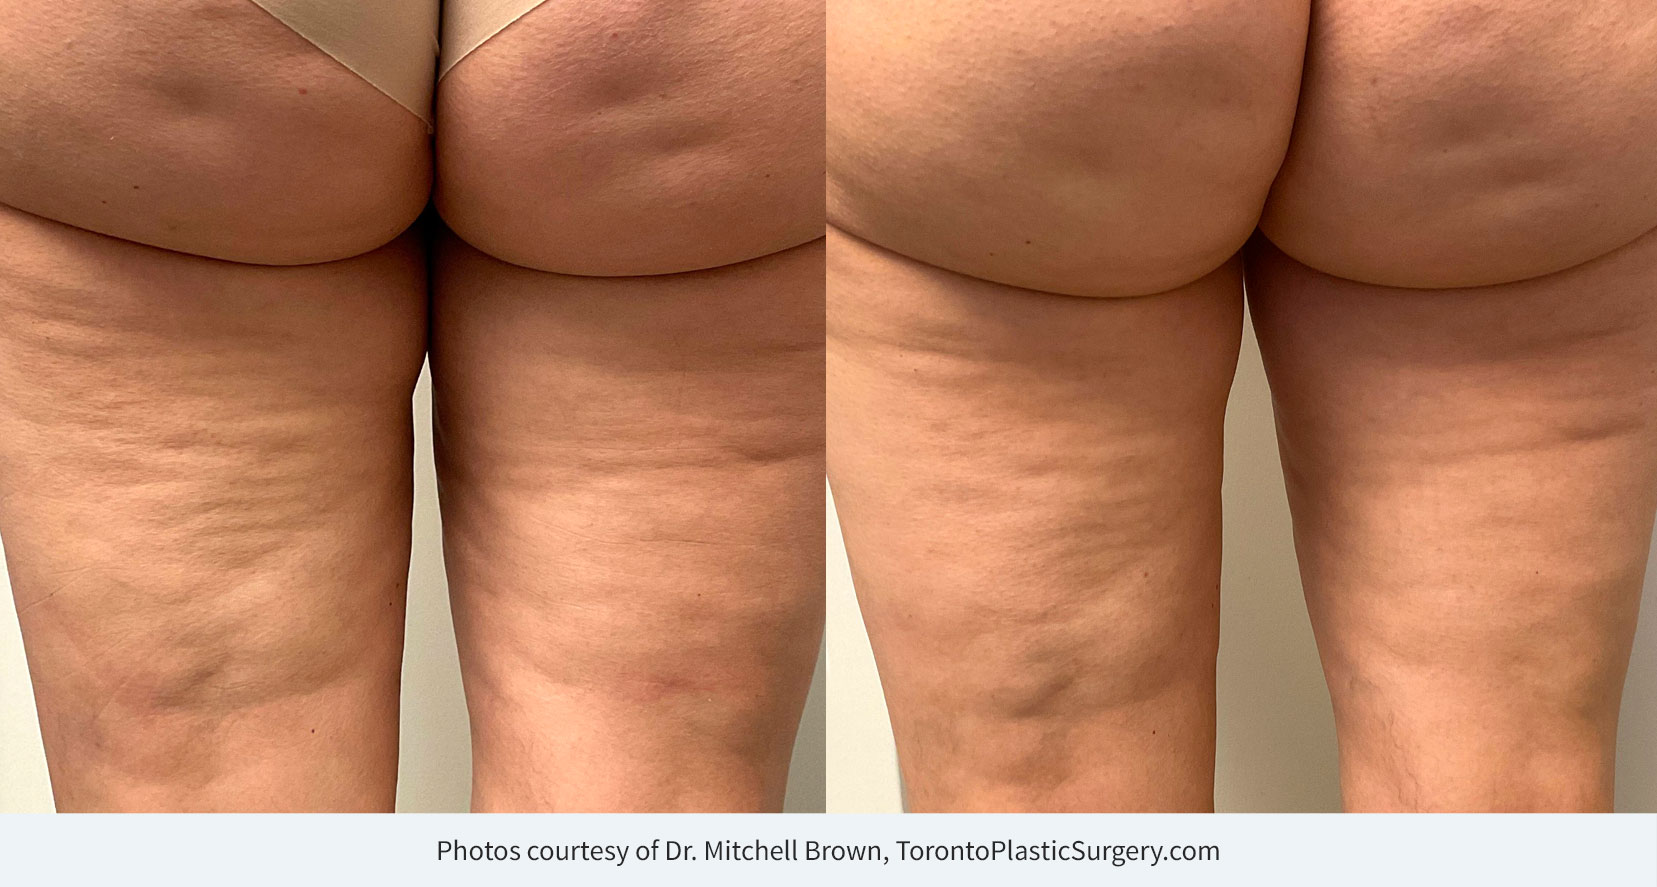 Endymed 3Deep Series 8, back of thighs treated. Before and 1 month after series completed.